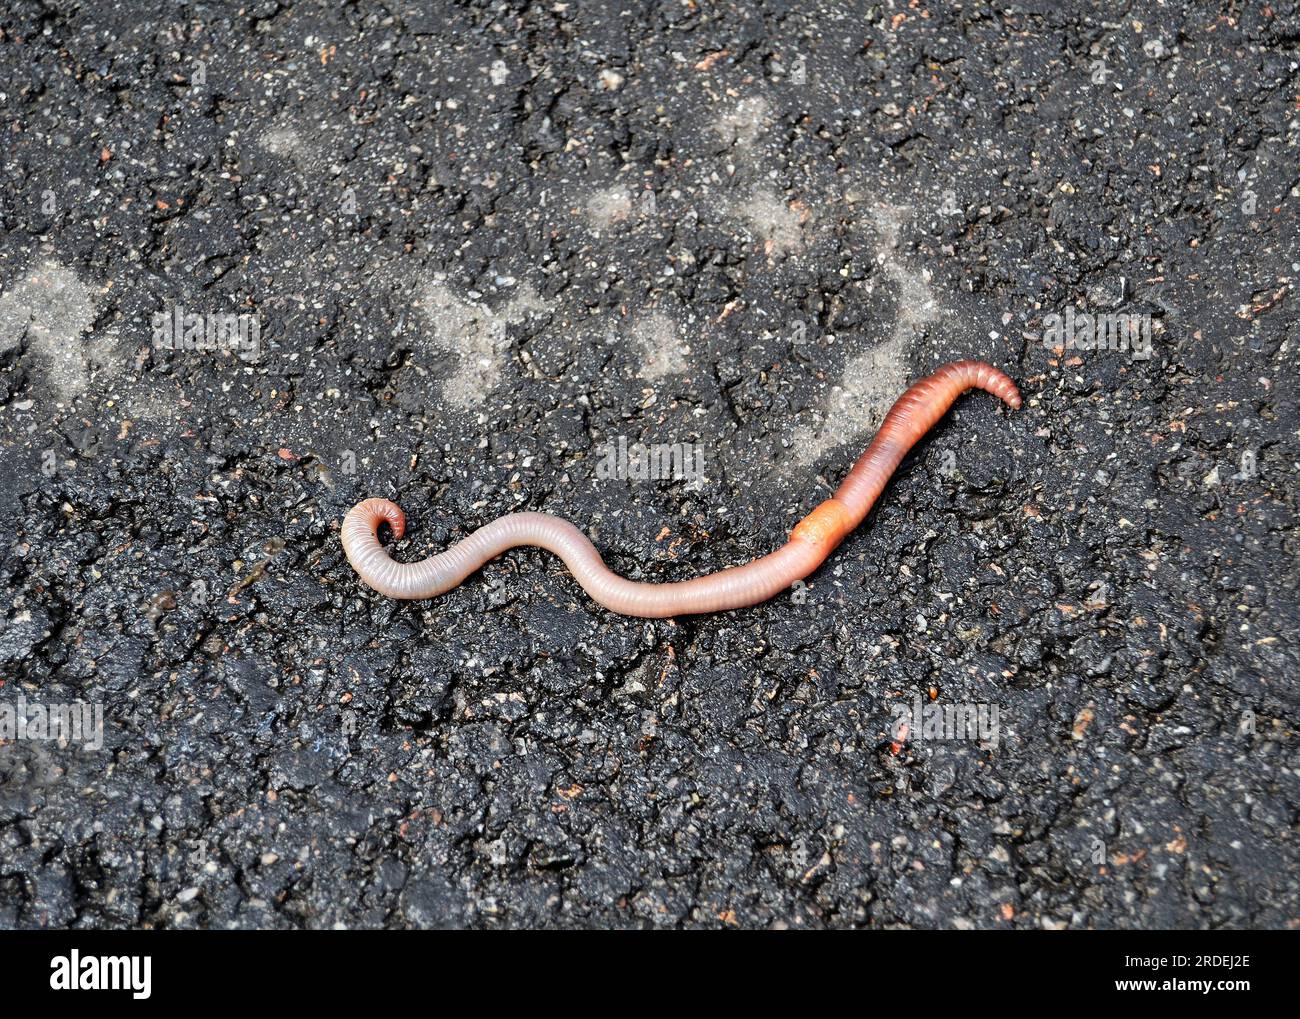 https://c8.alamy.com/comp/2RDEJ2E/red-earthworm-it-live-bait-for-fishing-isolated-on-dark-background-photography-consisting-of-striped-gaunt-earthworm-at-asphalt-natural-beauty-from-2RDEJ2E.jpg